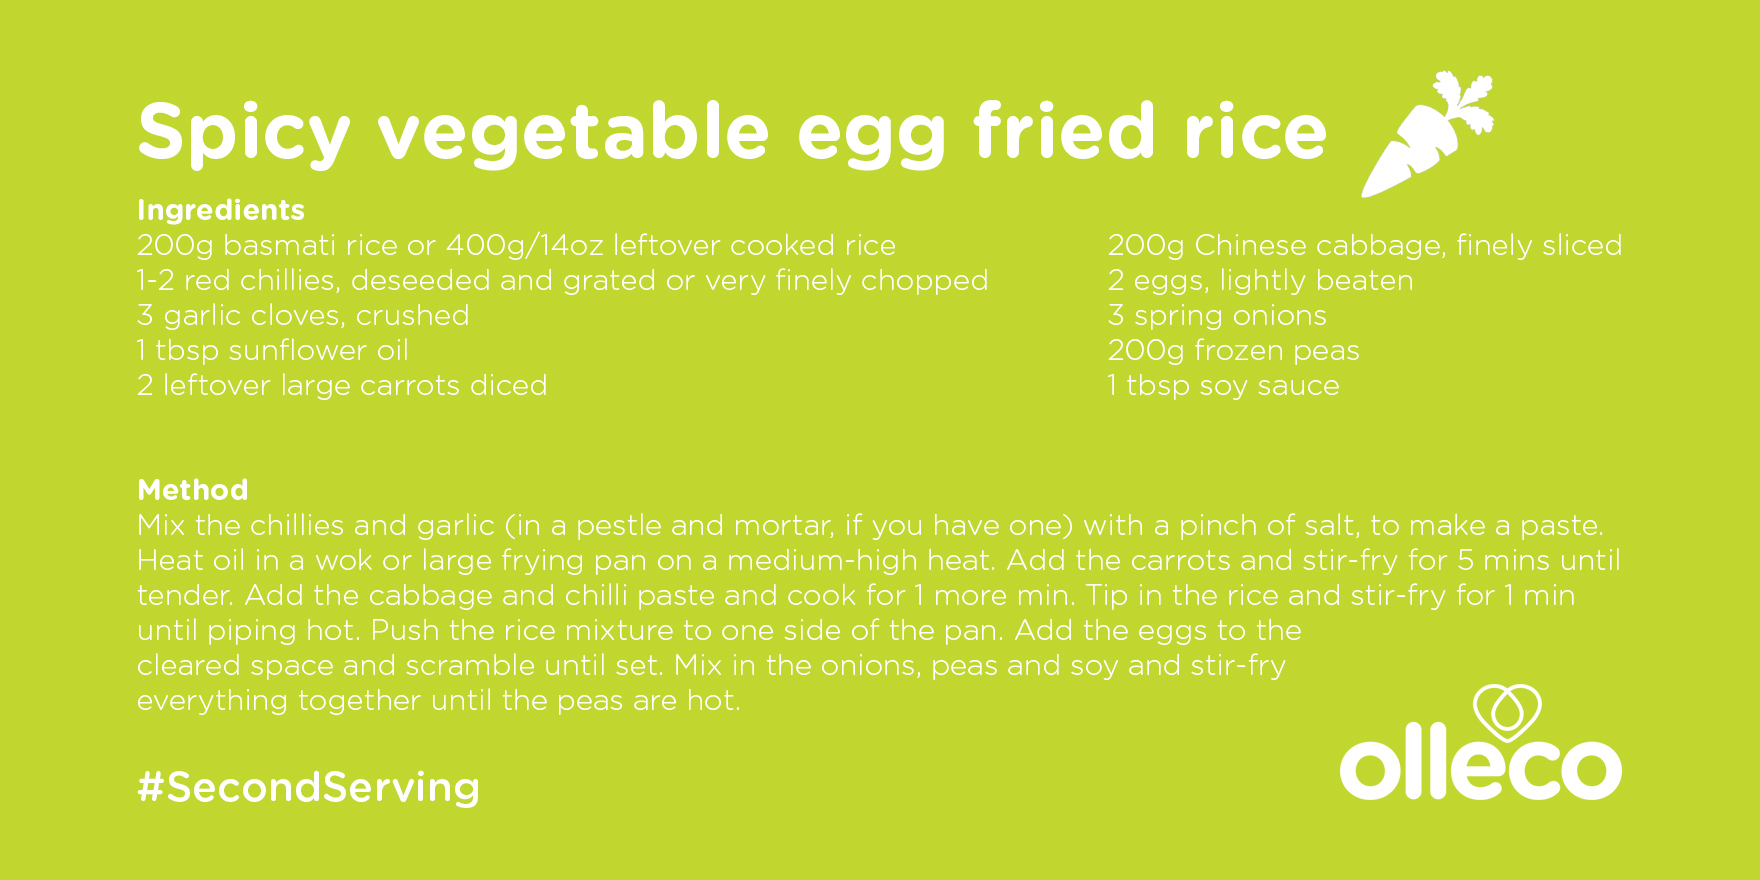 Spicy vegetable egg fried rice recipe